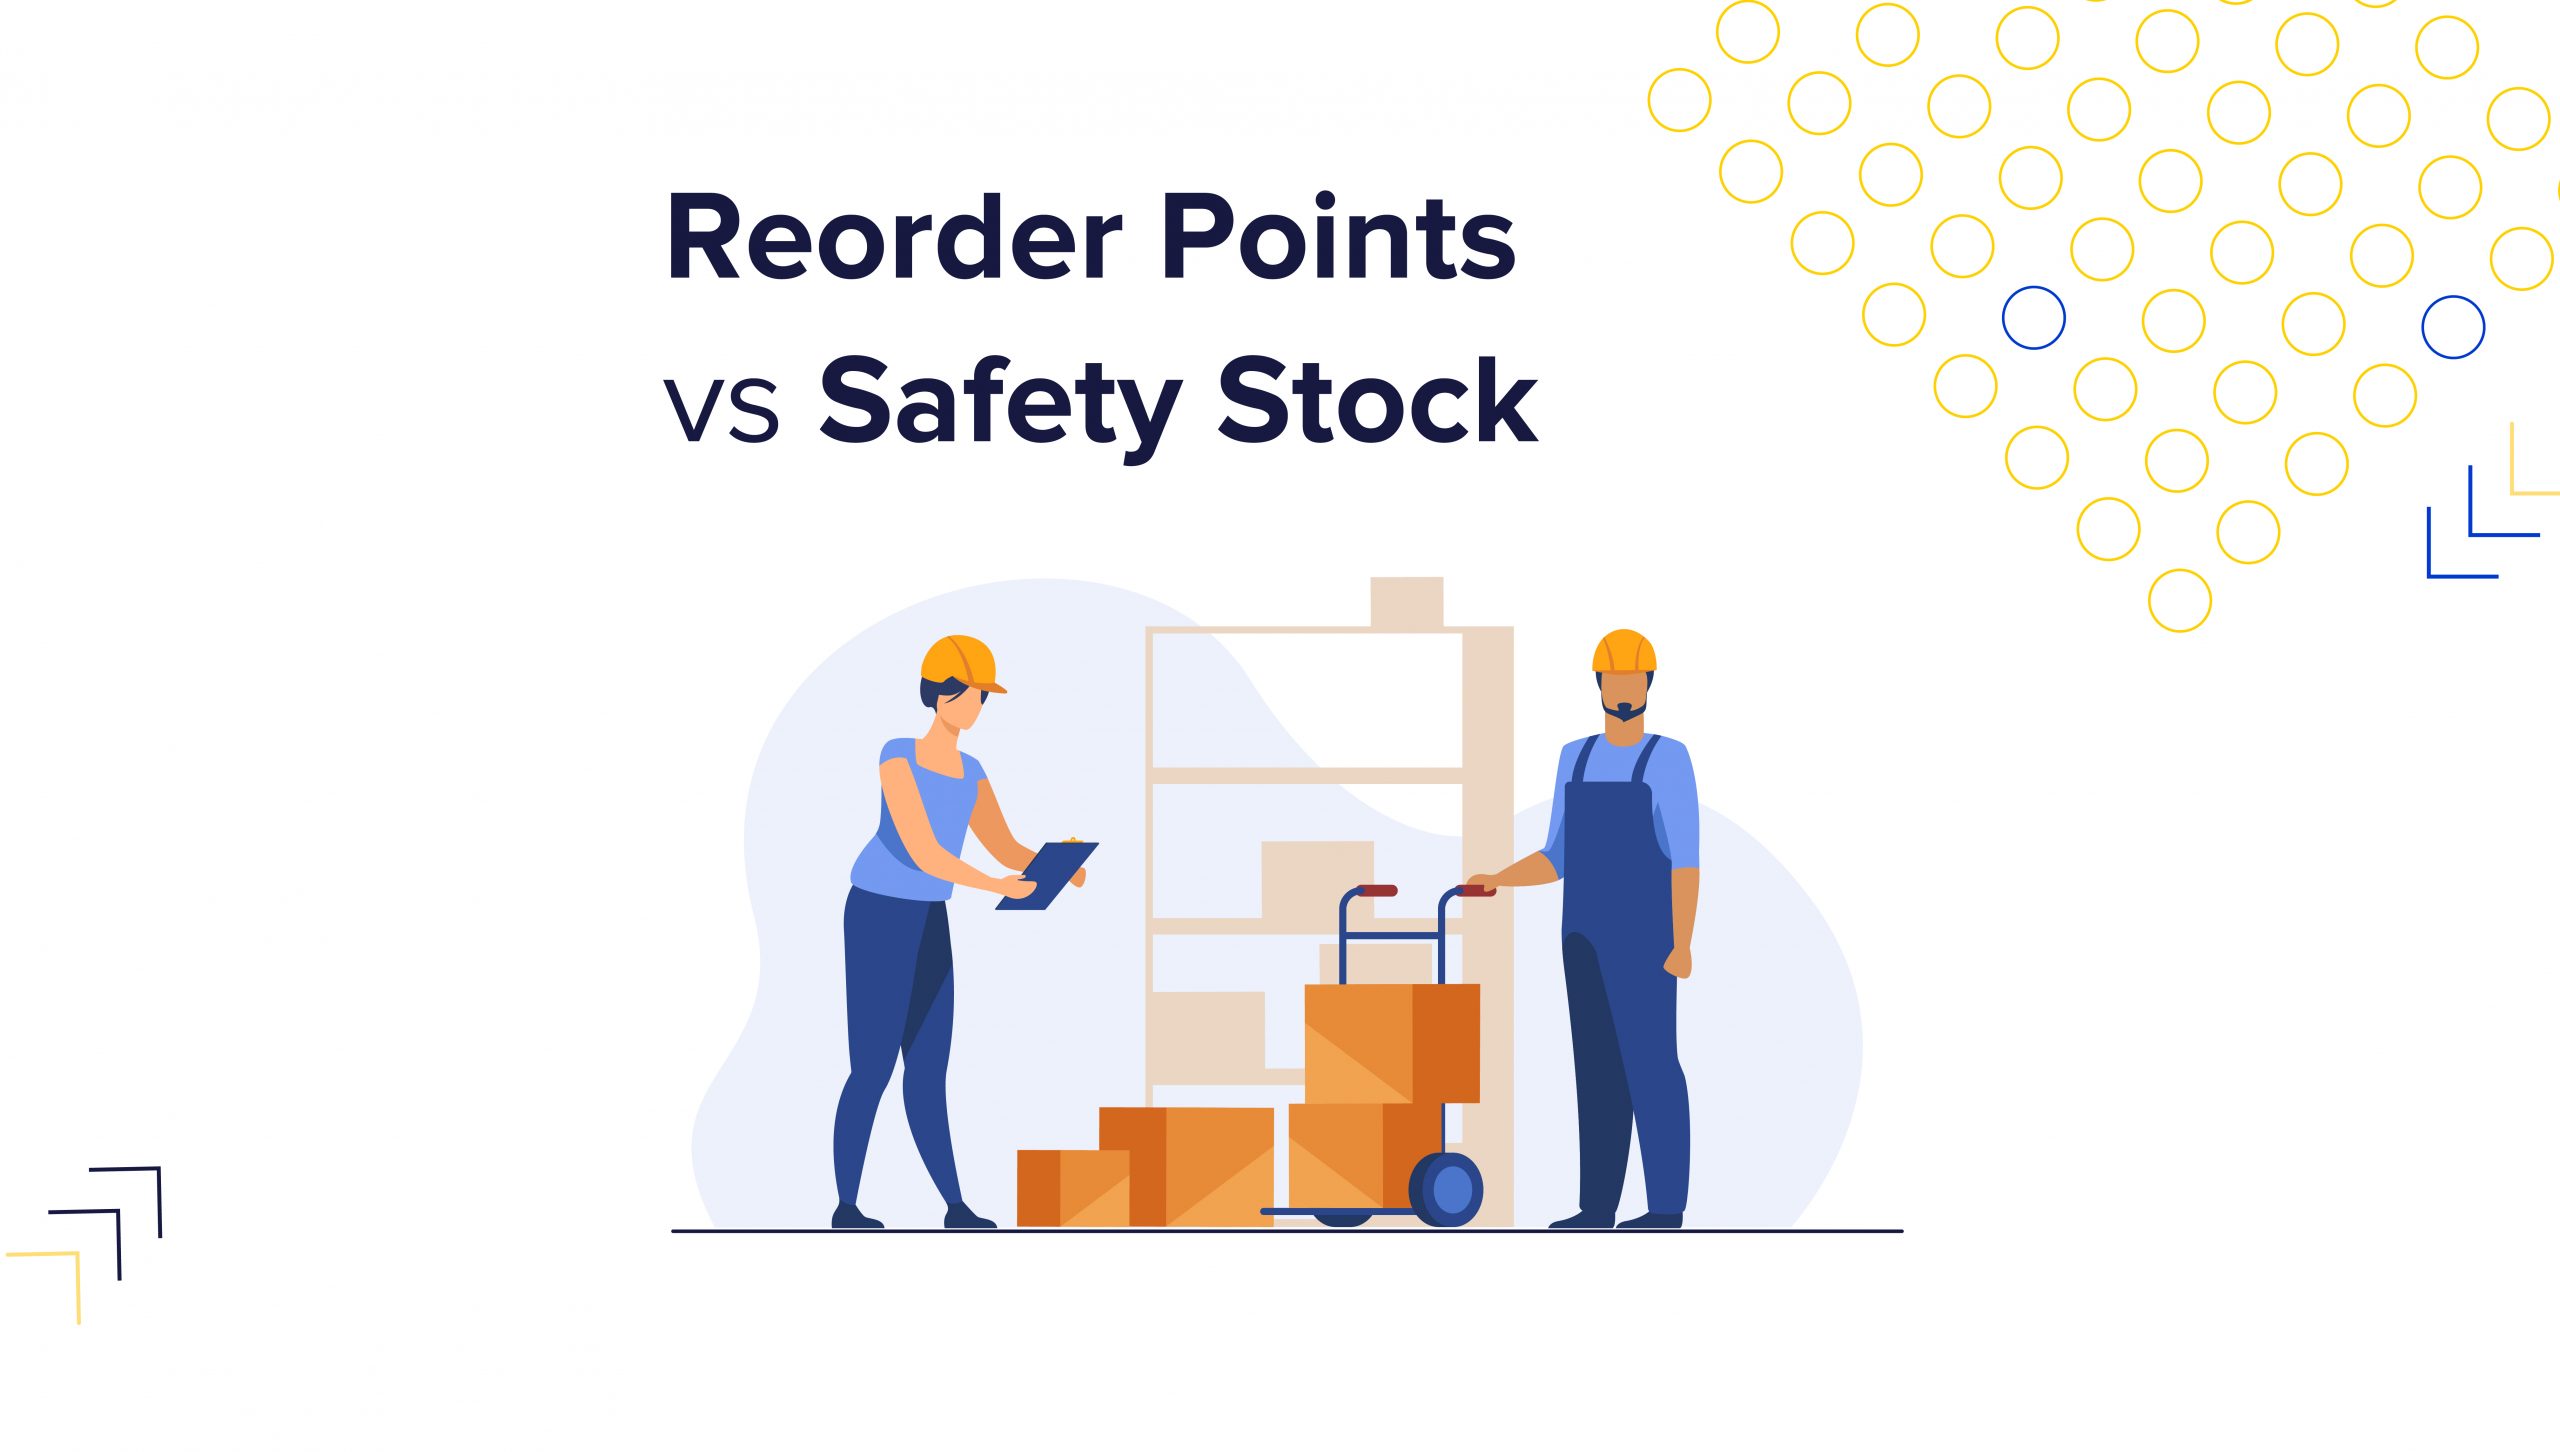 https://eswap.global/wp-content/uploads/2021/11/reorder_points_vs_safety_stock-scaled.jpg